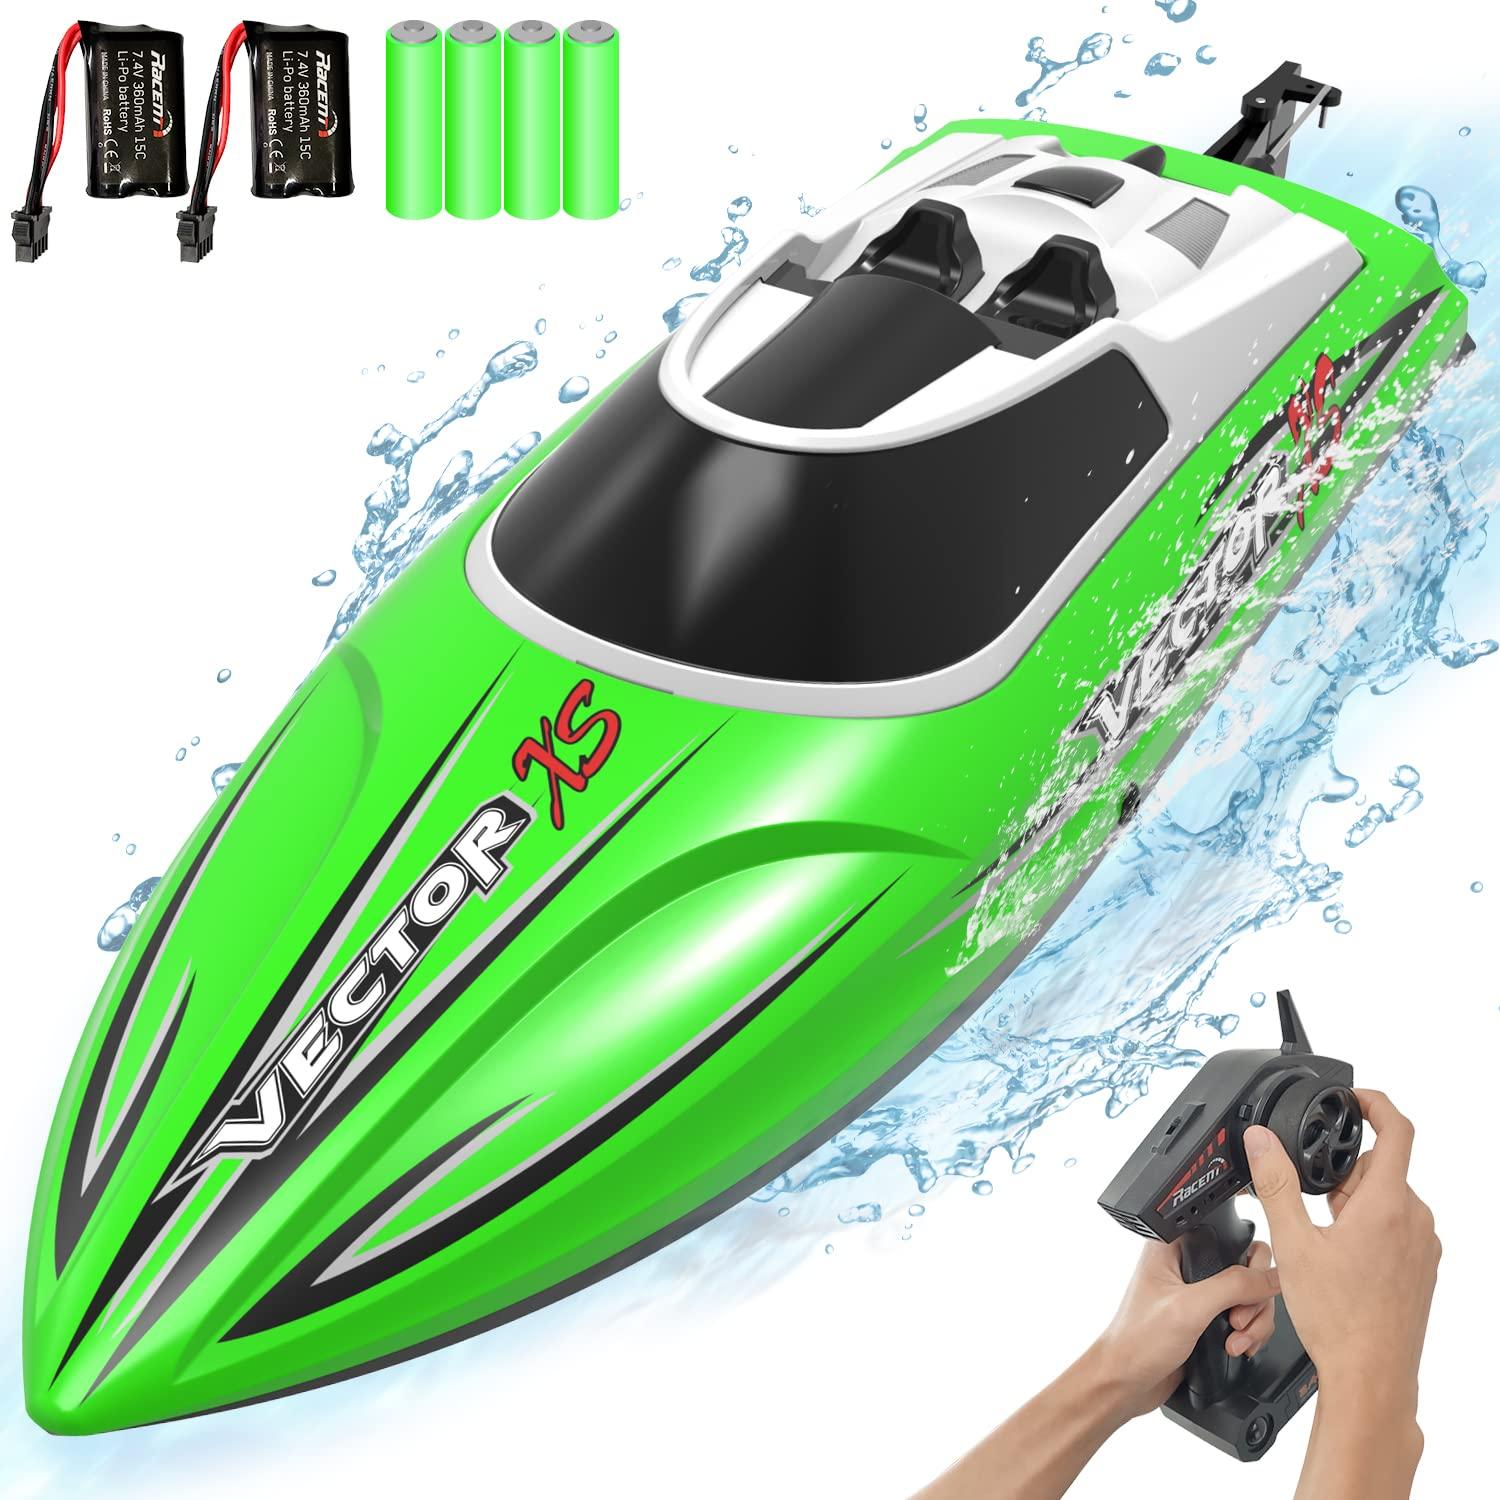 Fastest Rc Speed Boat: Choosing the Right RC Speed Boat